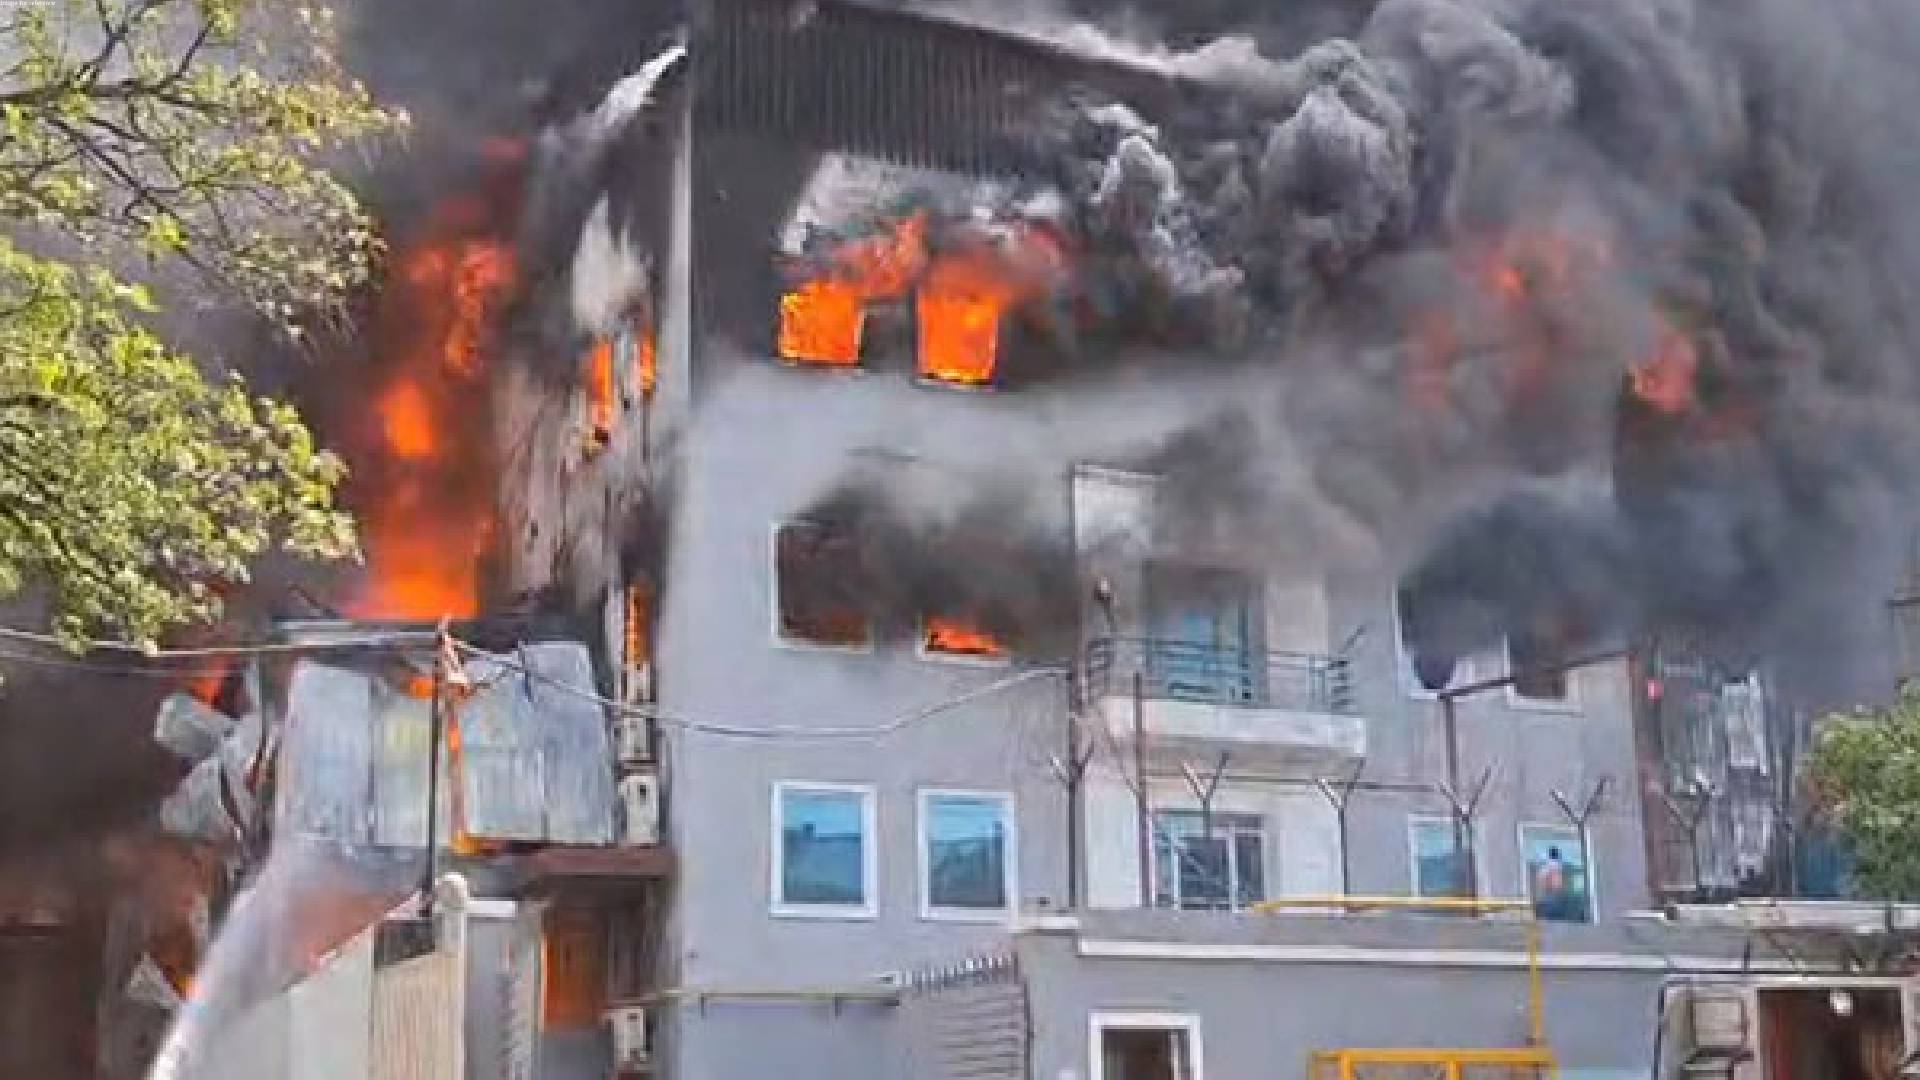 Ghaziabad: Fire breaks out at packaging factory in Tonika City industrial area